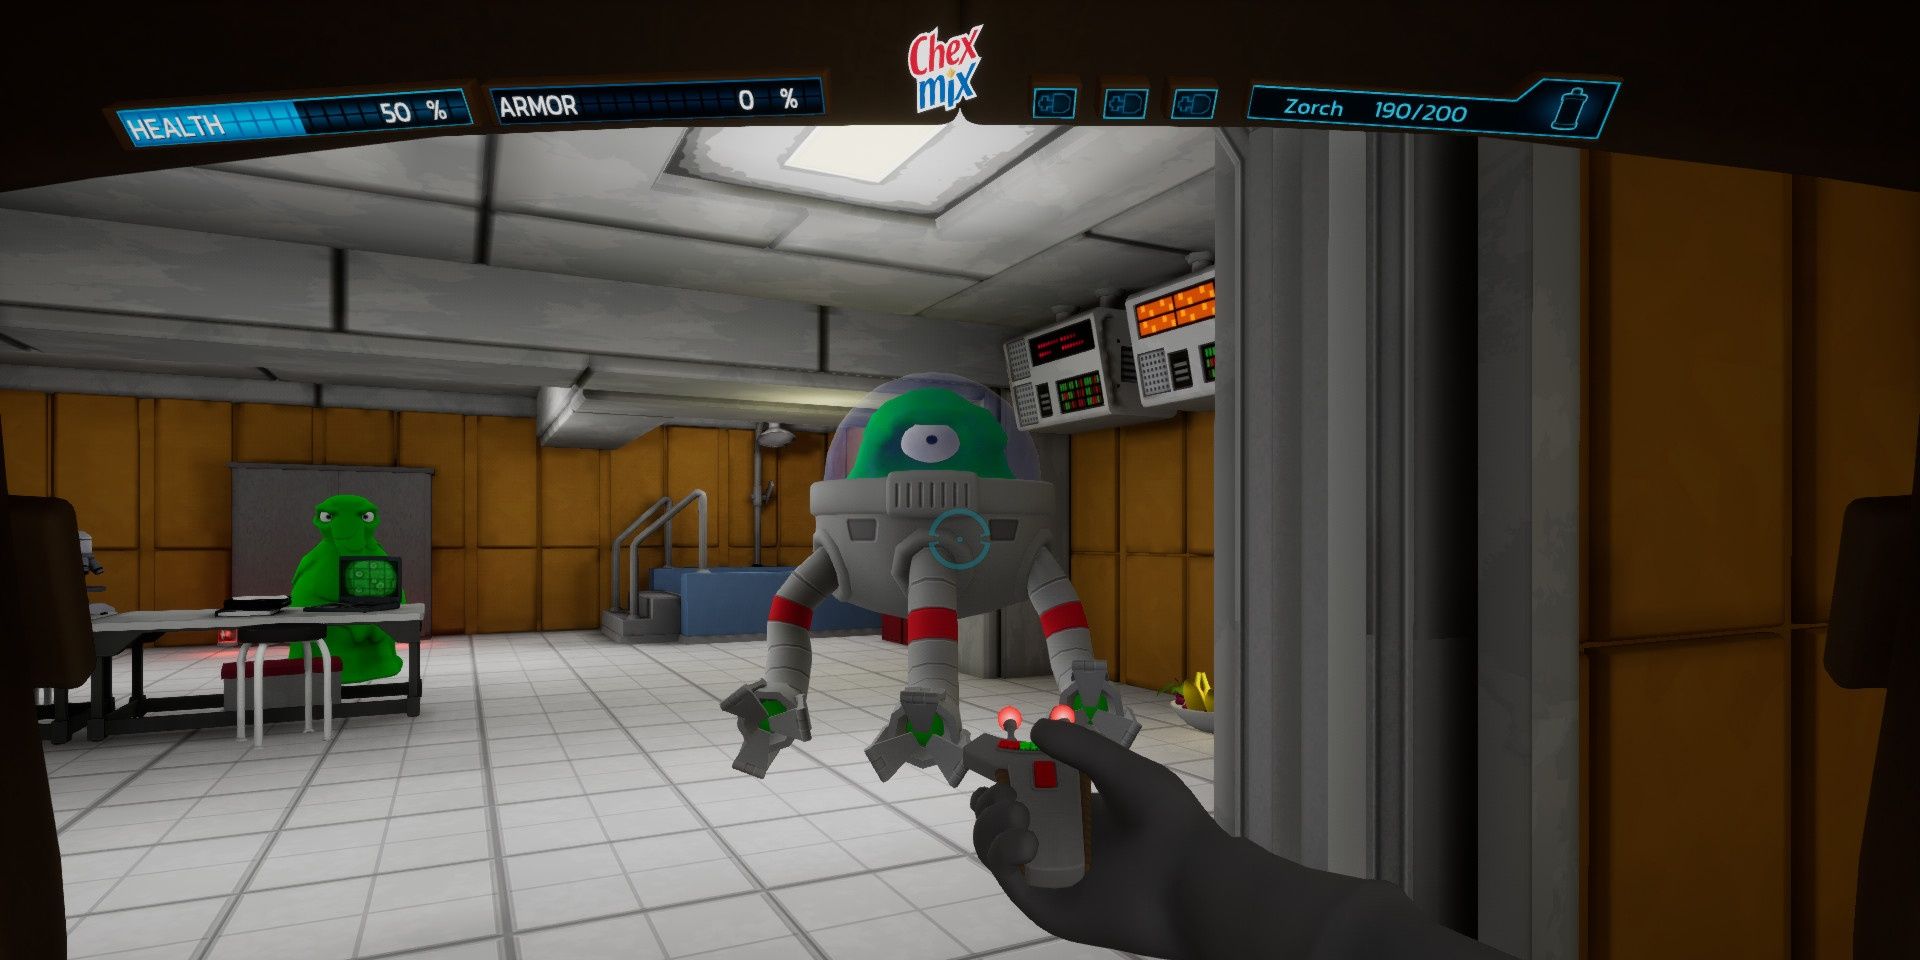 The player getting ready to shoot a Flemoid in Chex Quest